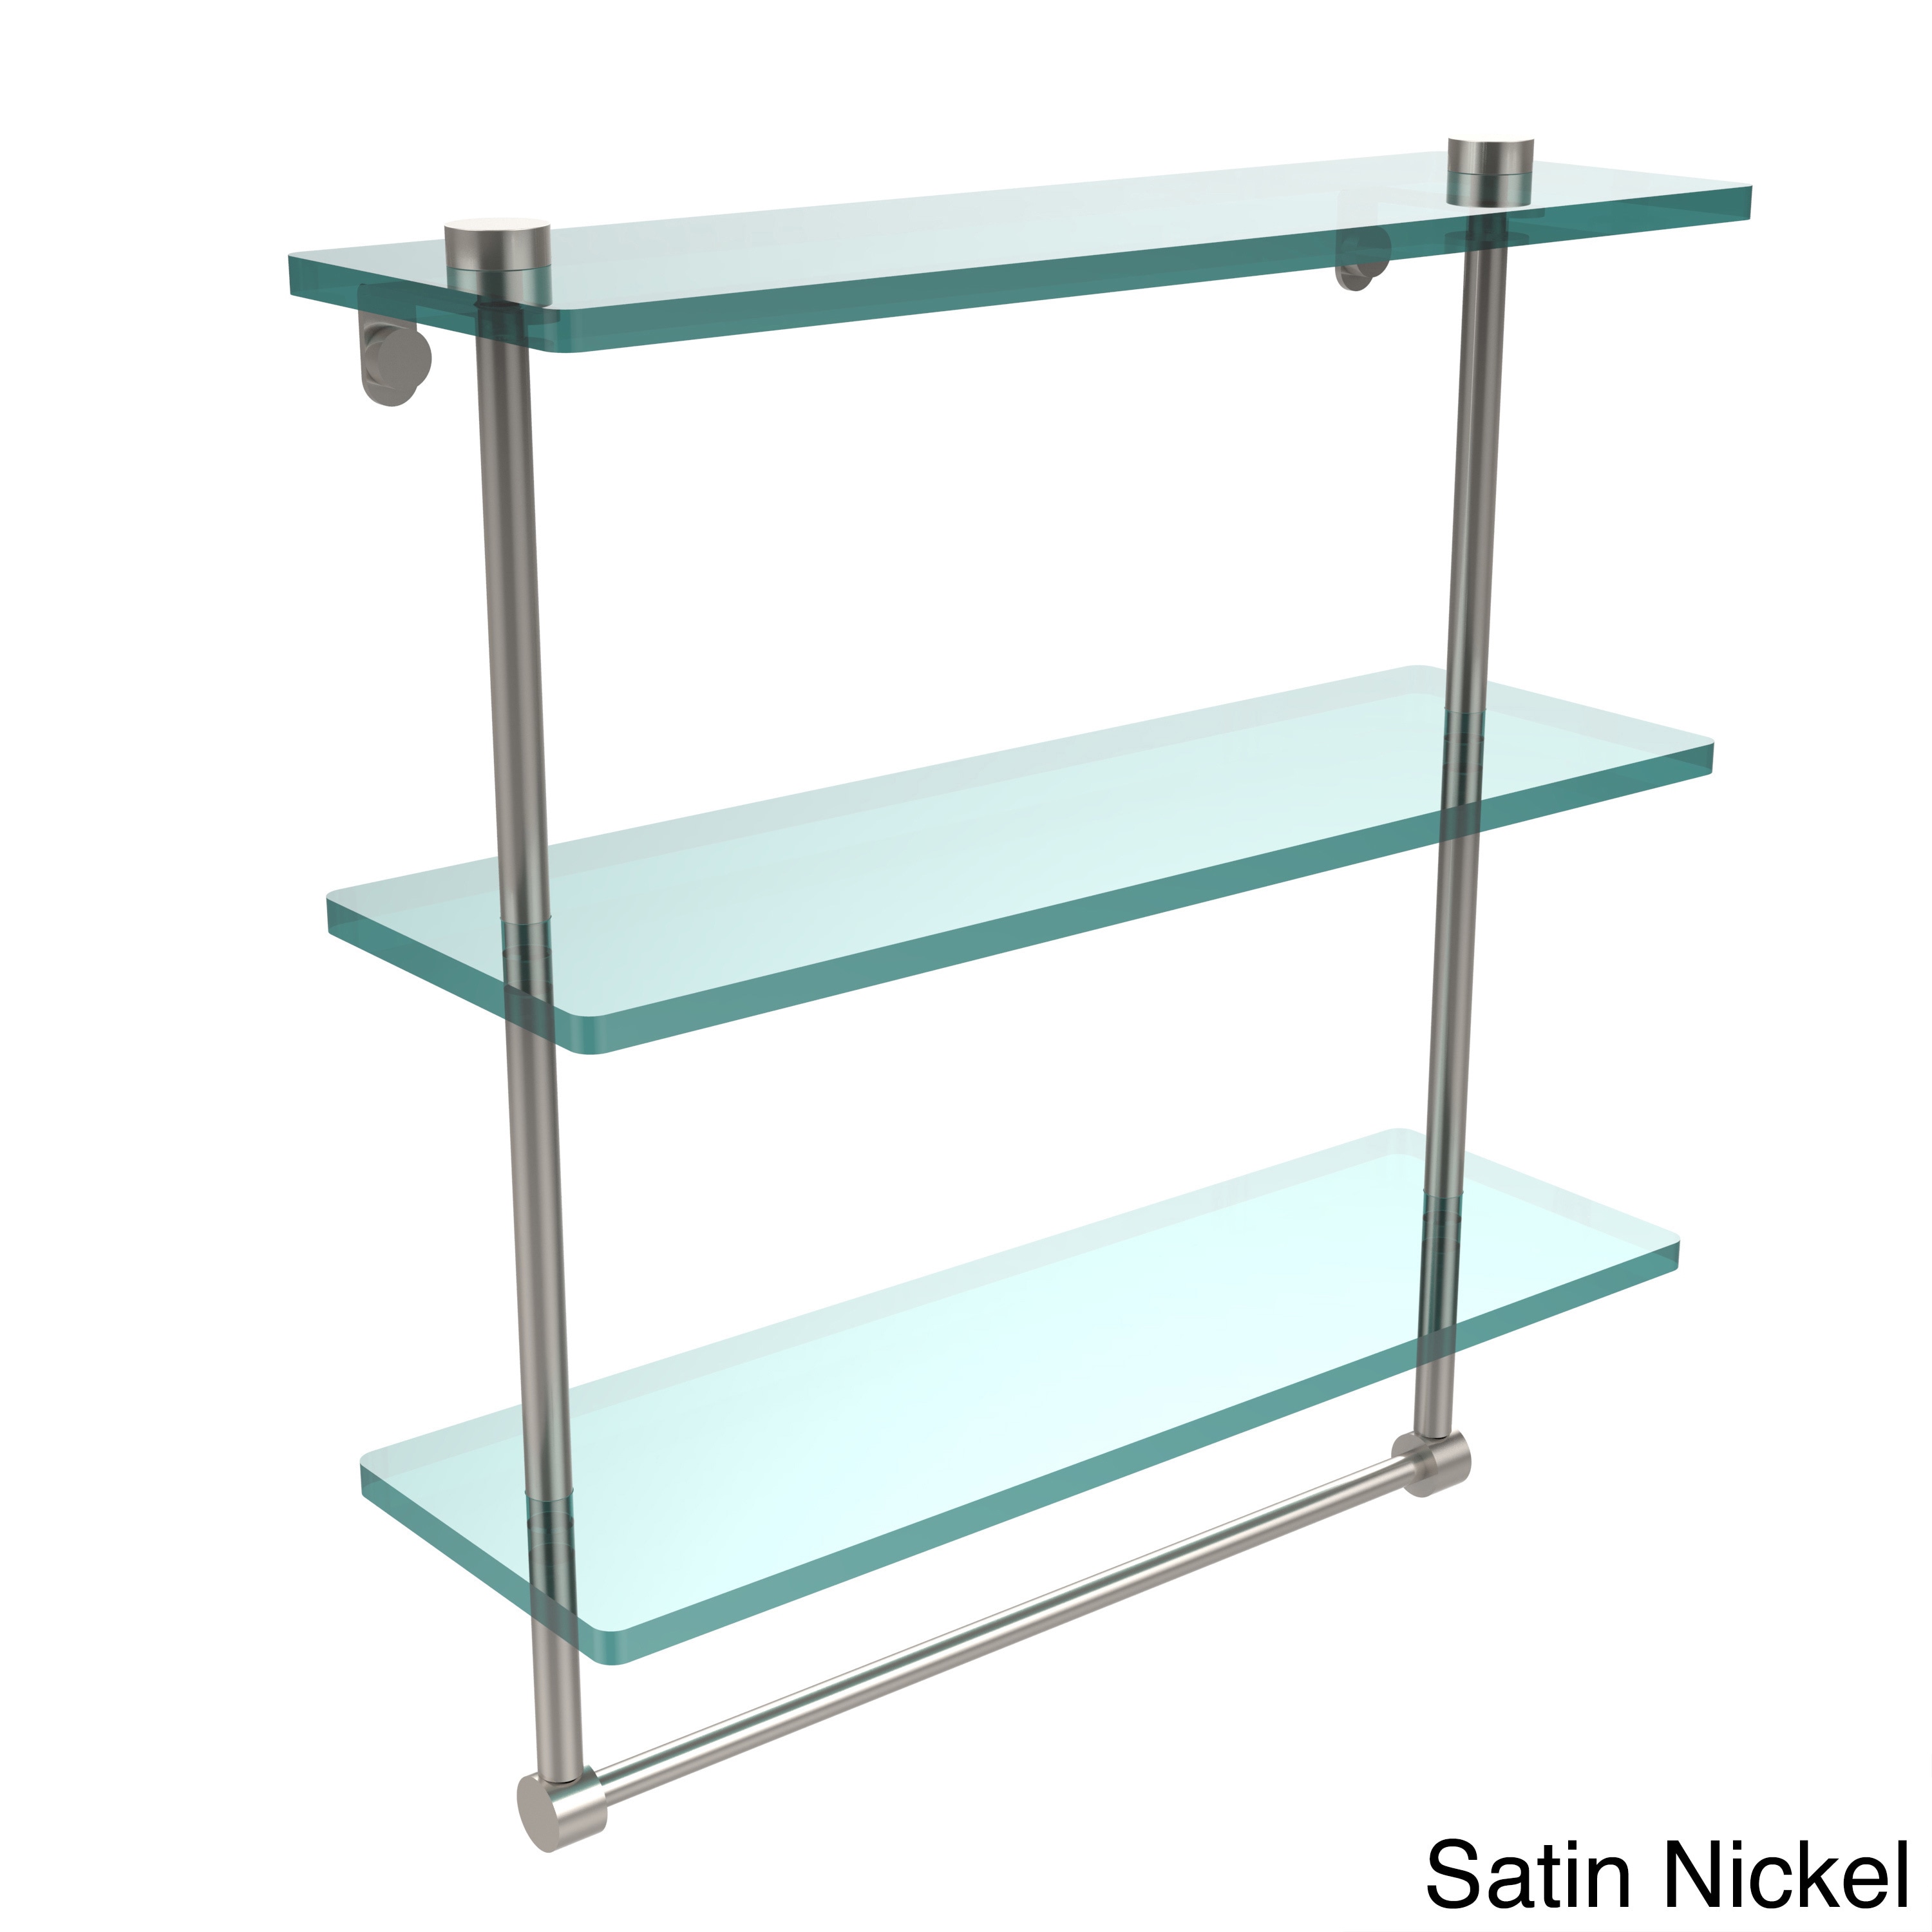 16-in Triple Tiered Glass Shelf with Integrated Towel Bar in Polished Nickel - image 3 of 5